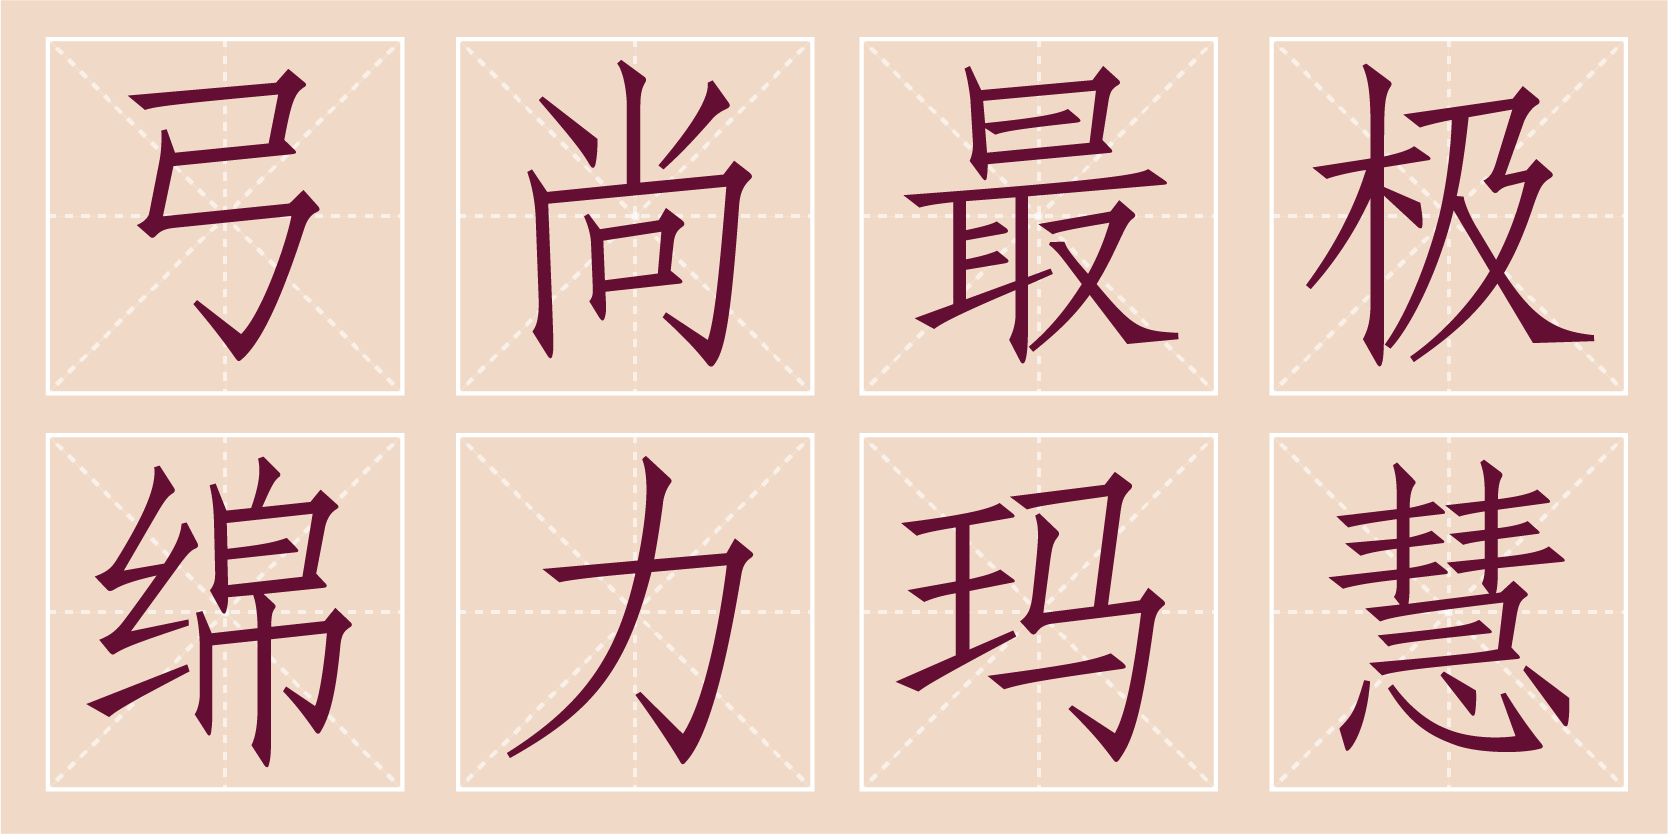 Card displaying Adobe Fangsong typeface in various styles